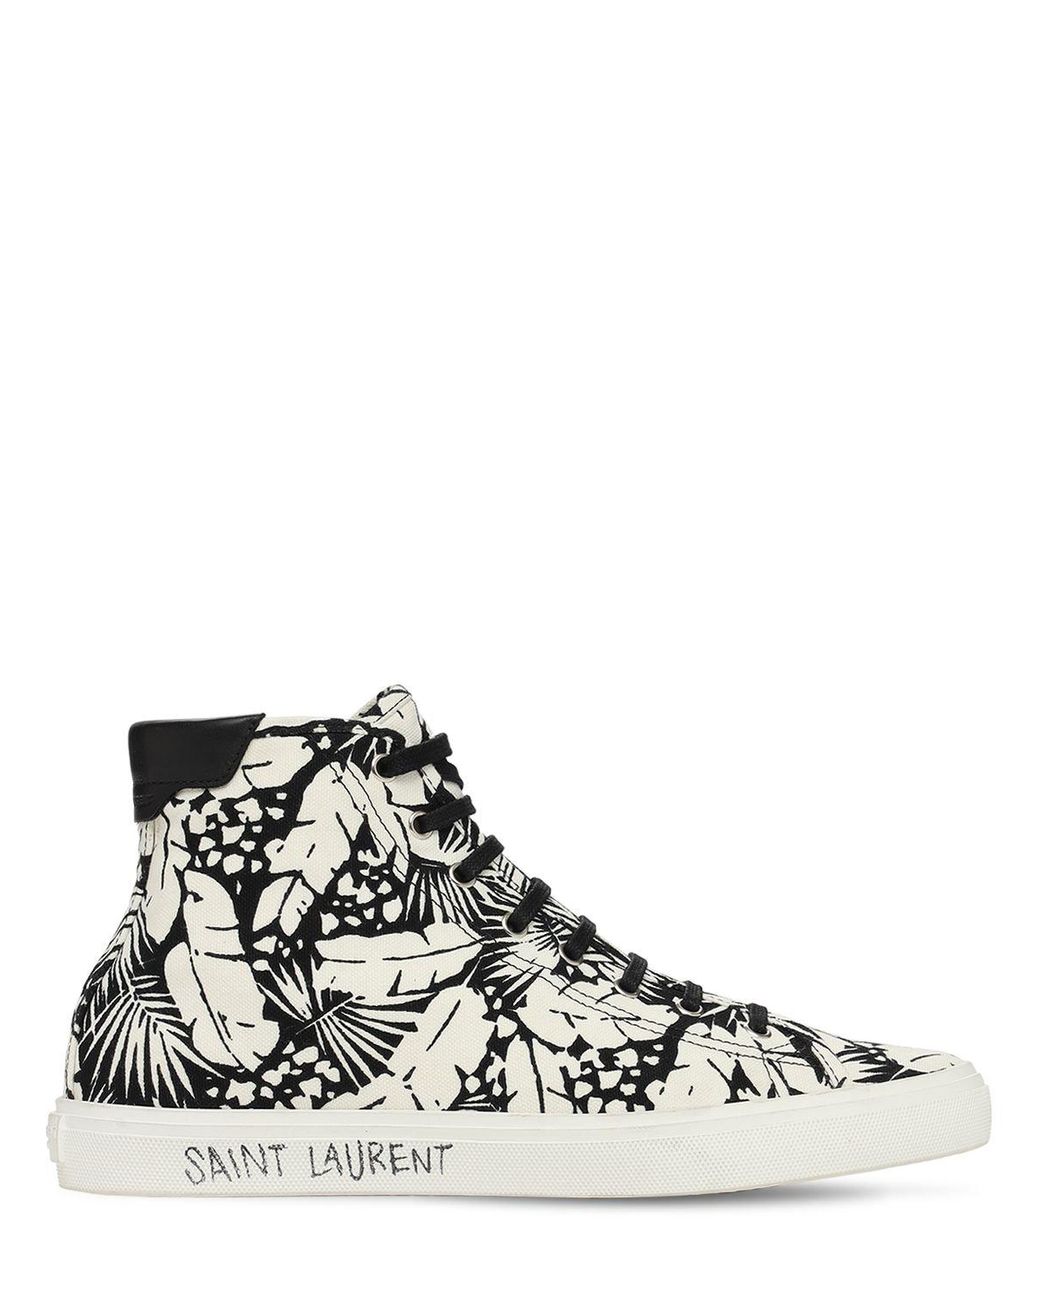 Saint Laurent Palm Print High Top Canvas Sneakers in Black for Men | Lyst